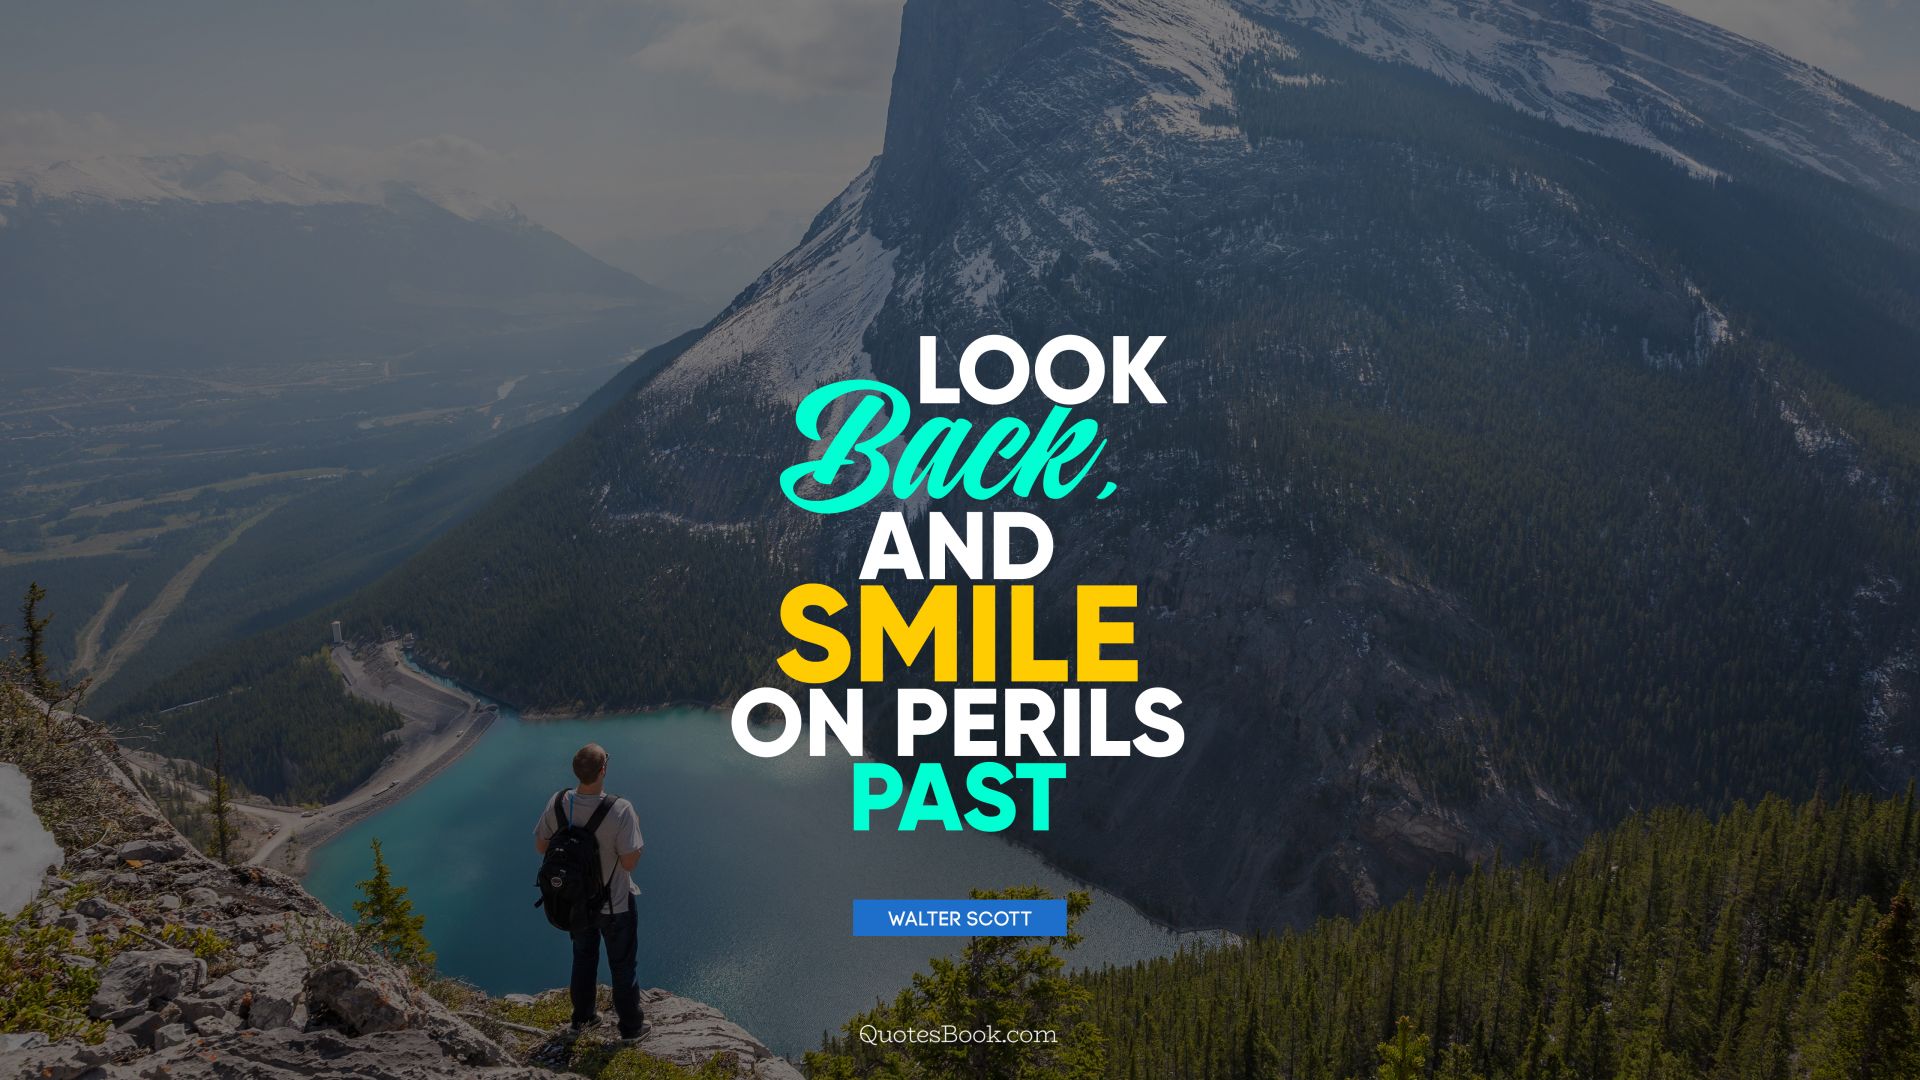 Look back, and smile on perils past. - Quote by Walter Scott